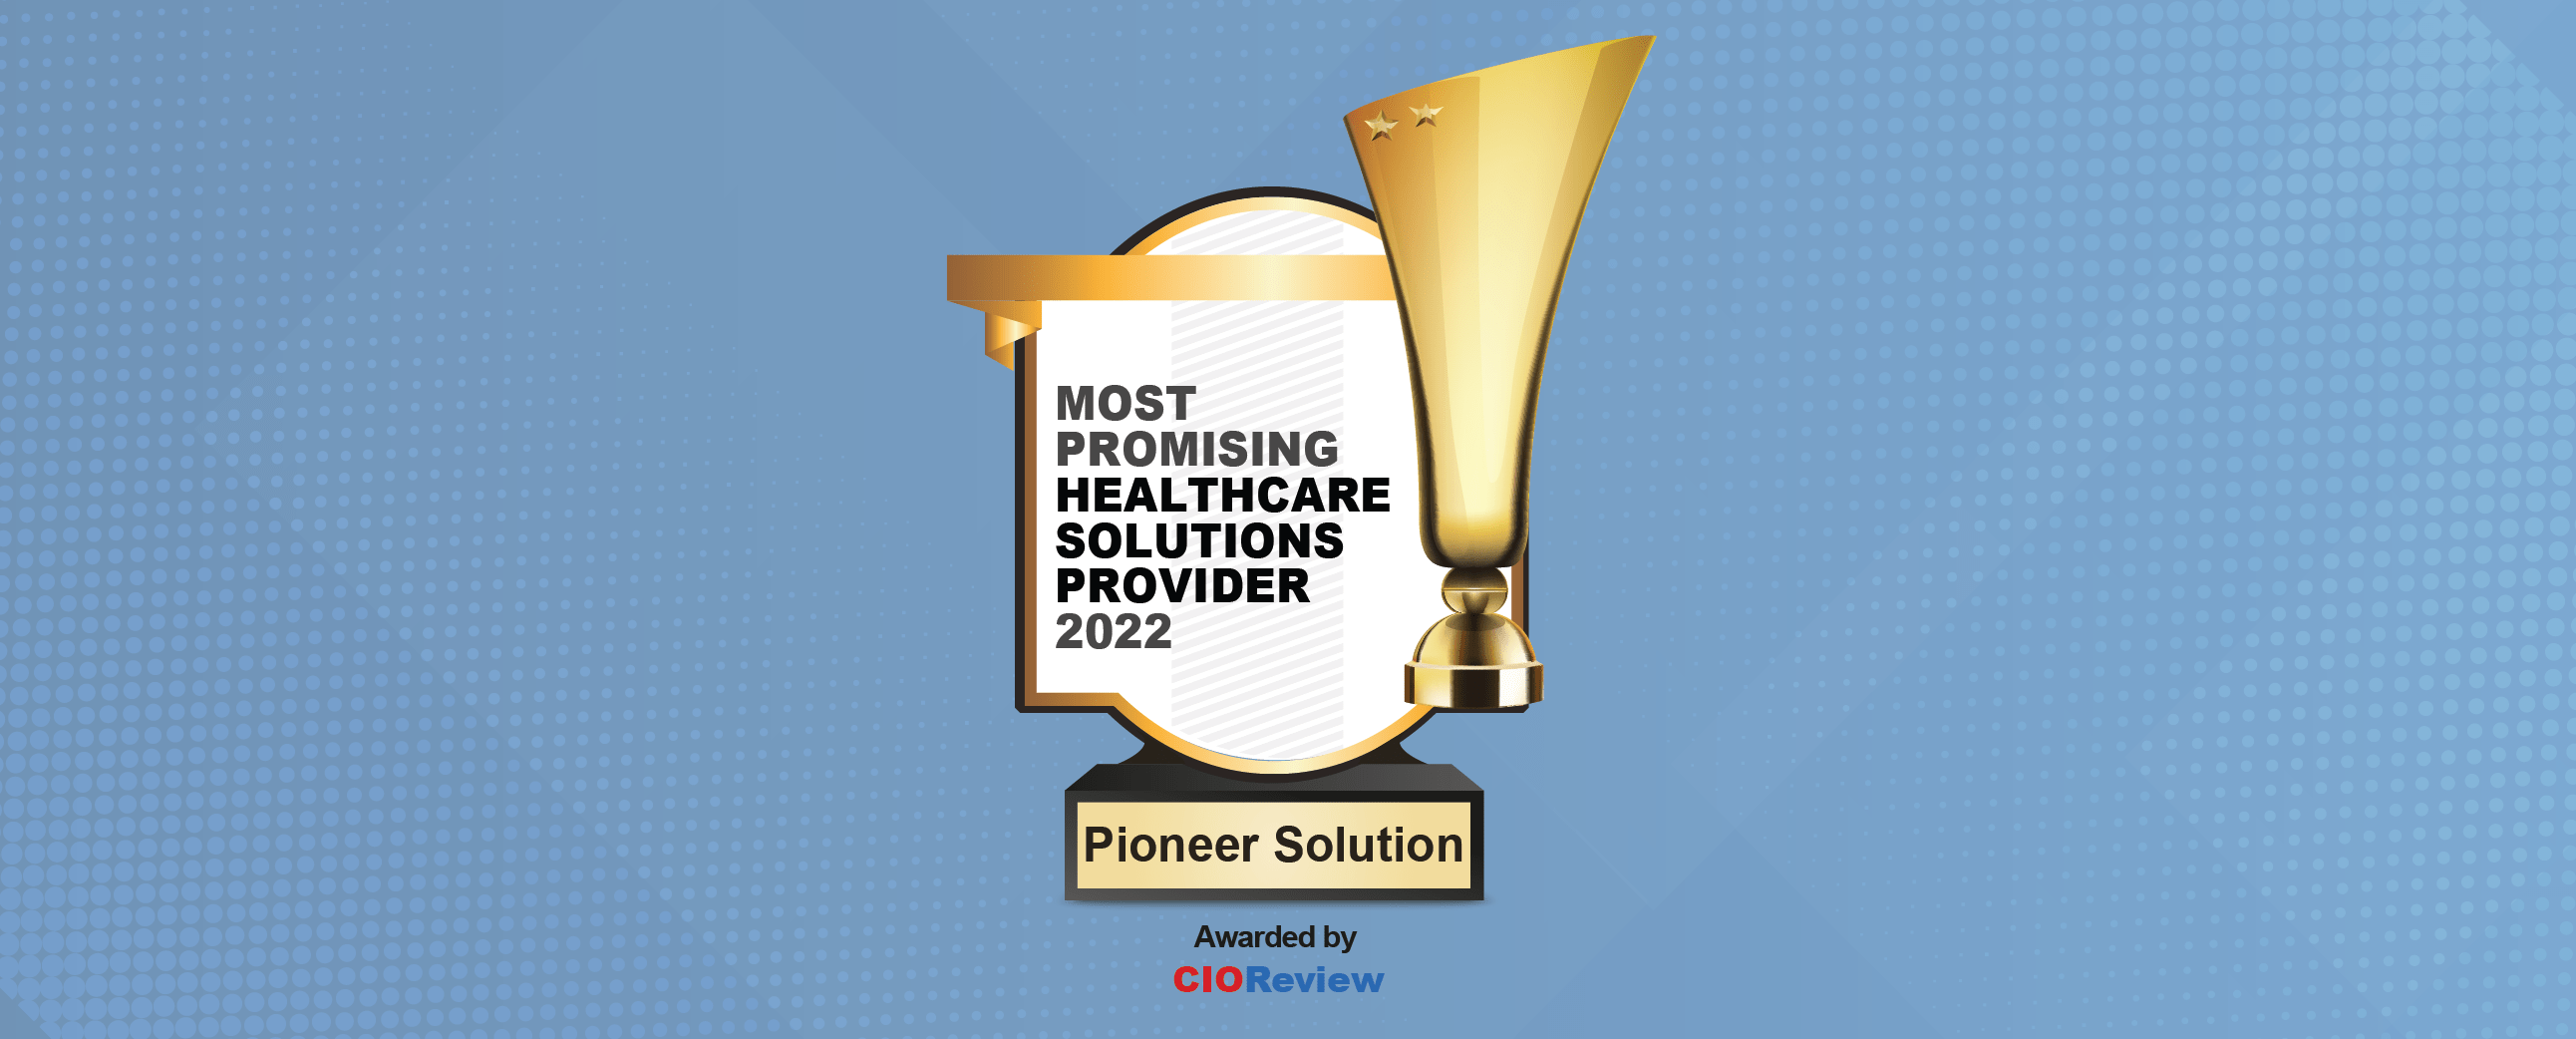 Pioneer named the Most Promising Healthcare Solutions Provider 2022